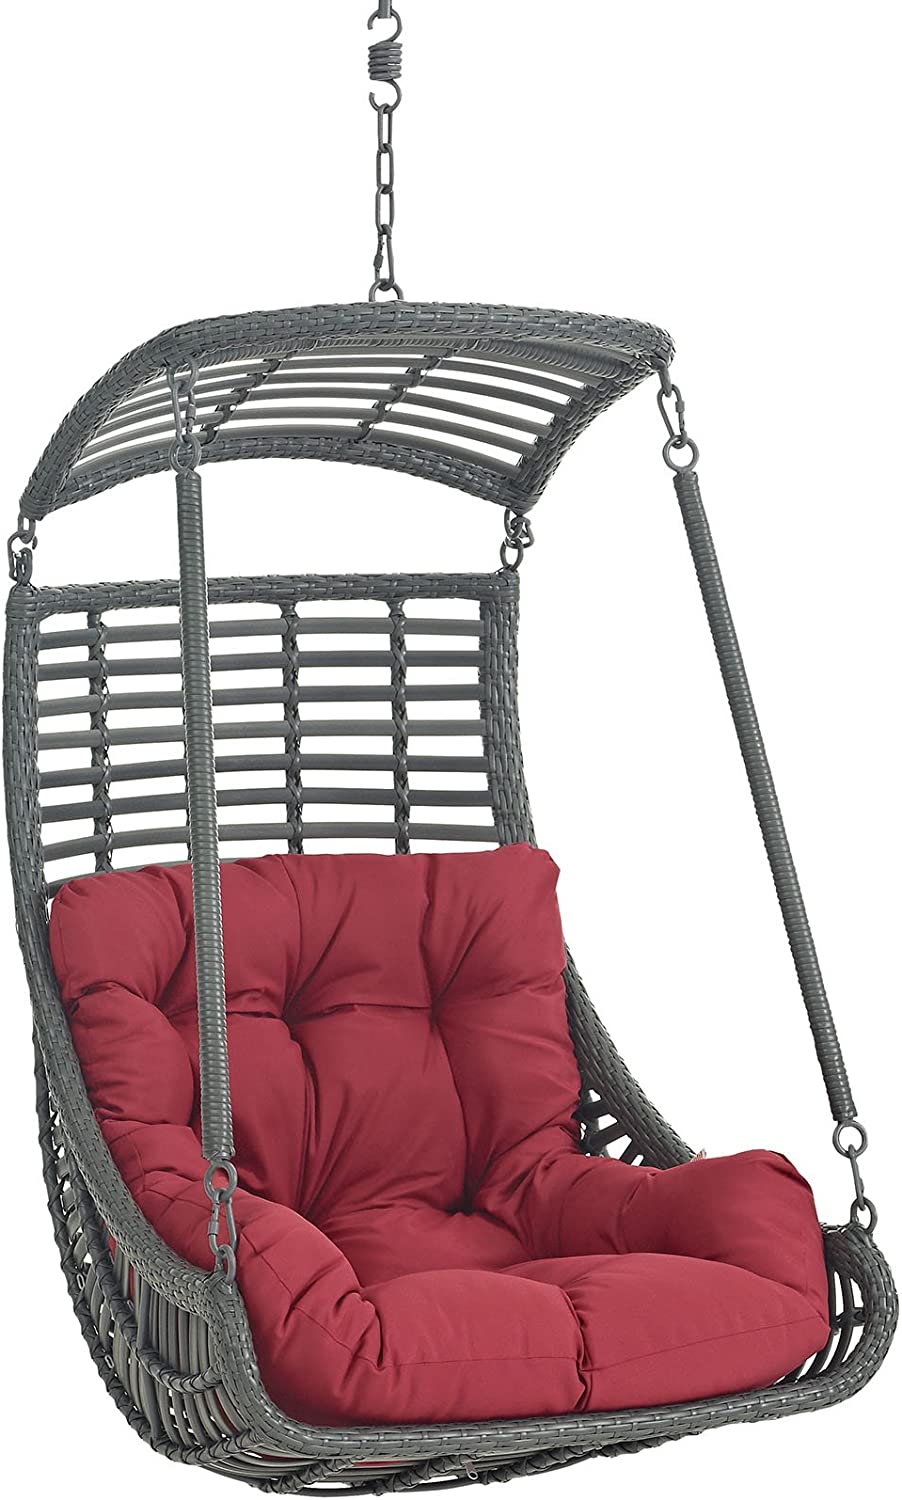 Modway EEI-2274-RED-SET Jungle Outdoor Patio Balcony Porch Lounge Swing Chair Set with Stand Red